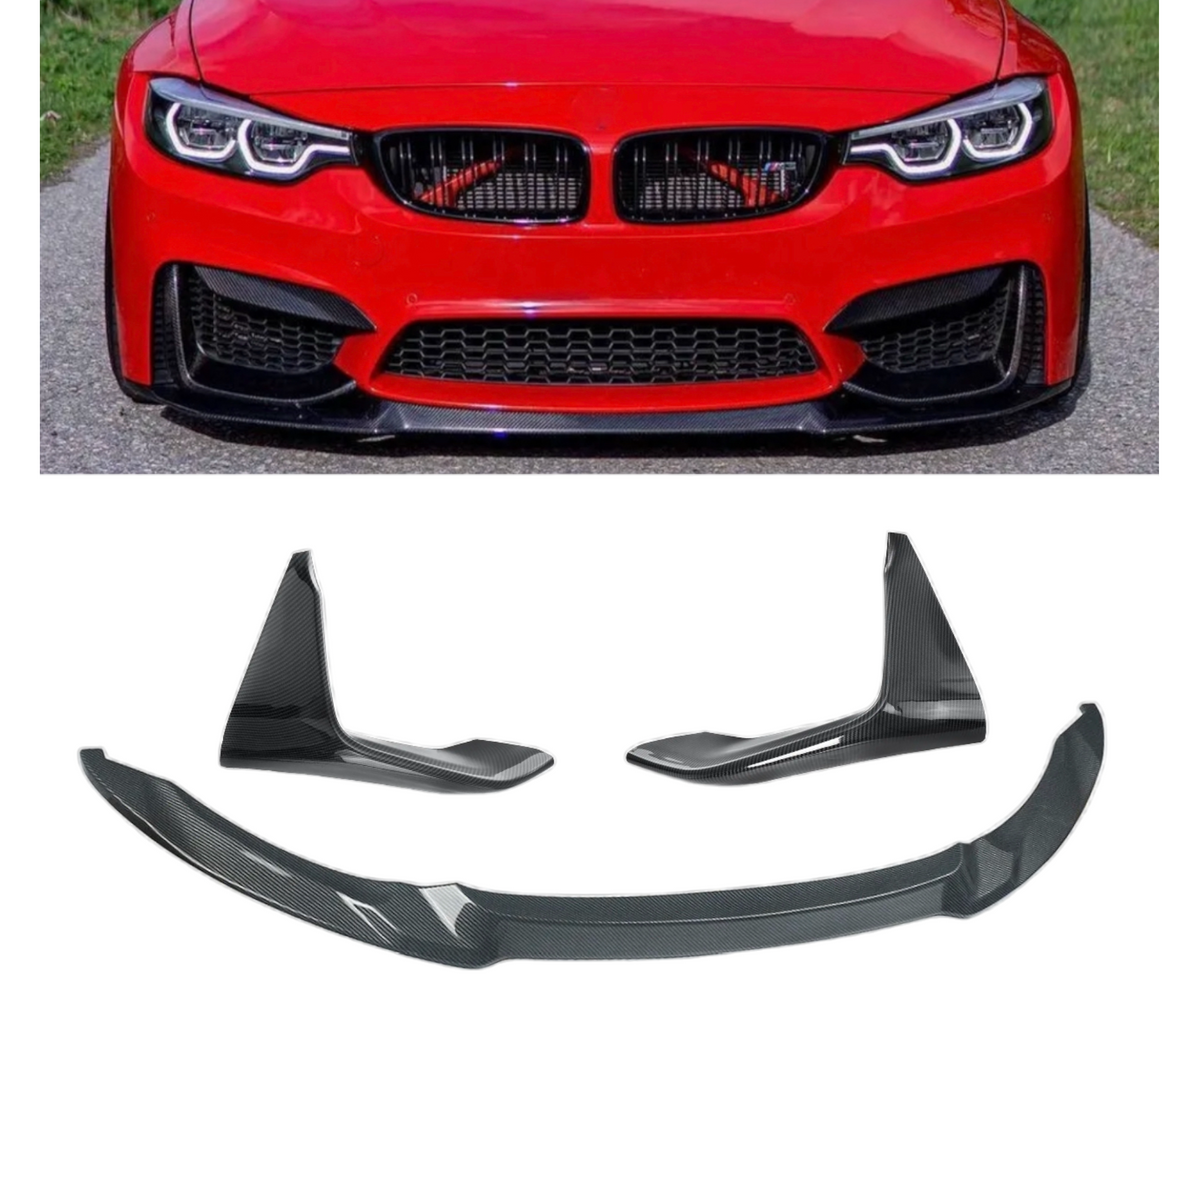 Front Splitter With Canards - CS Style - Fits BMW F80 F82 F83 M3 M4 - ABS - Carbon Look